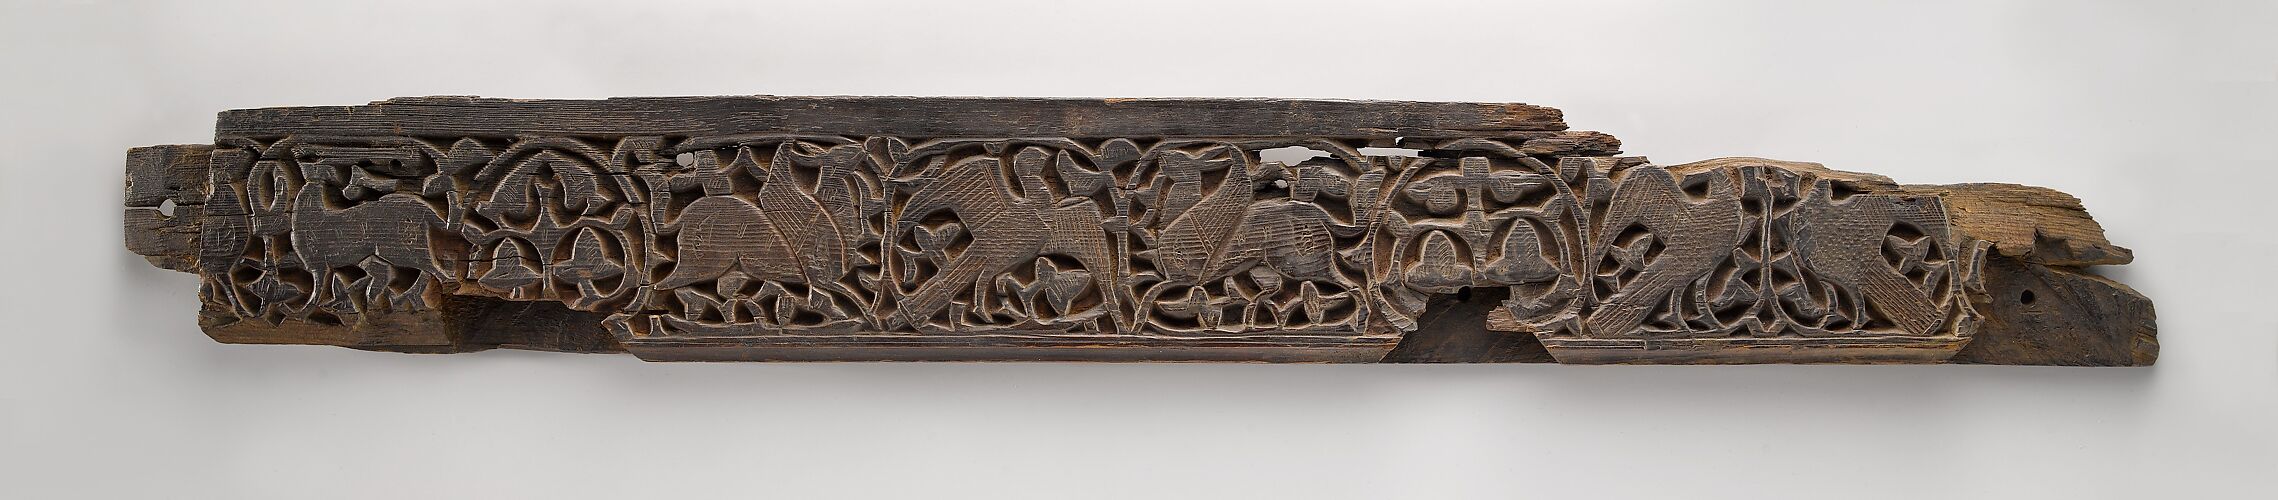 Panel with Birds, Griffins, and Animals